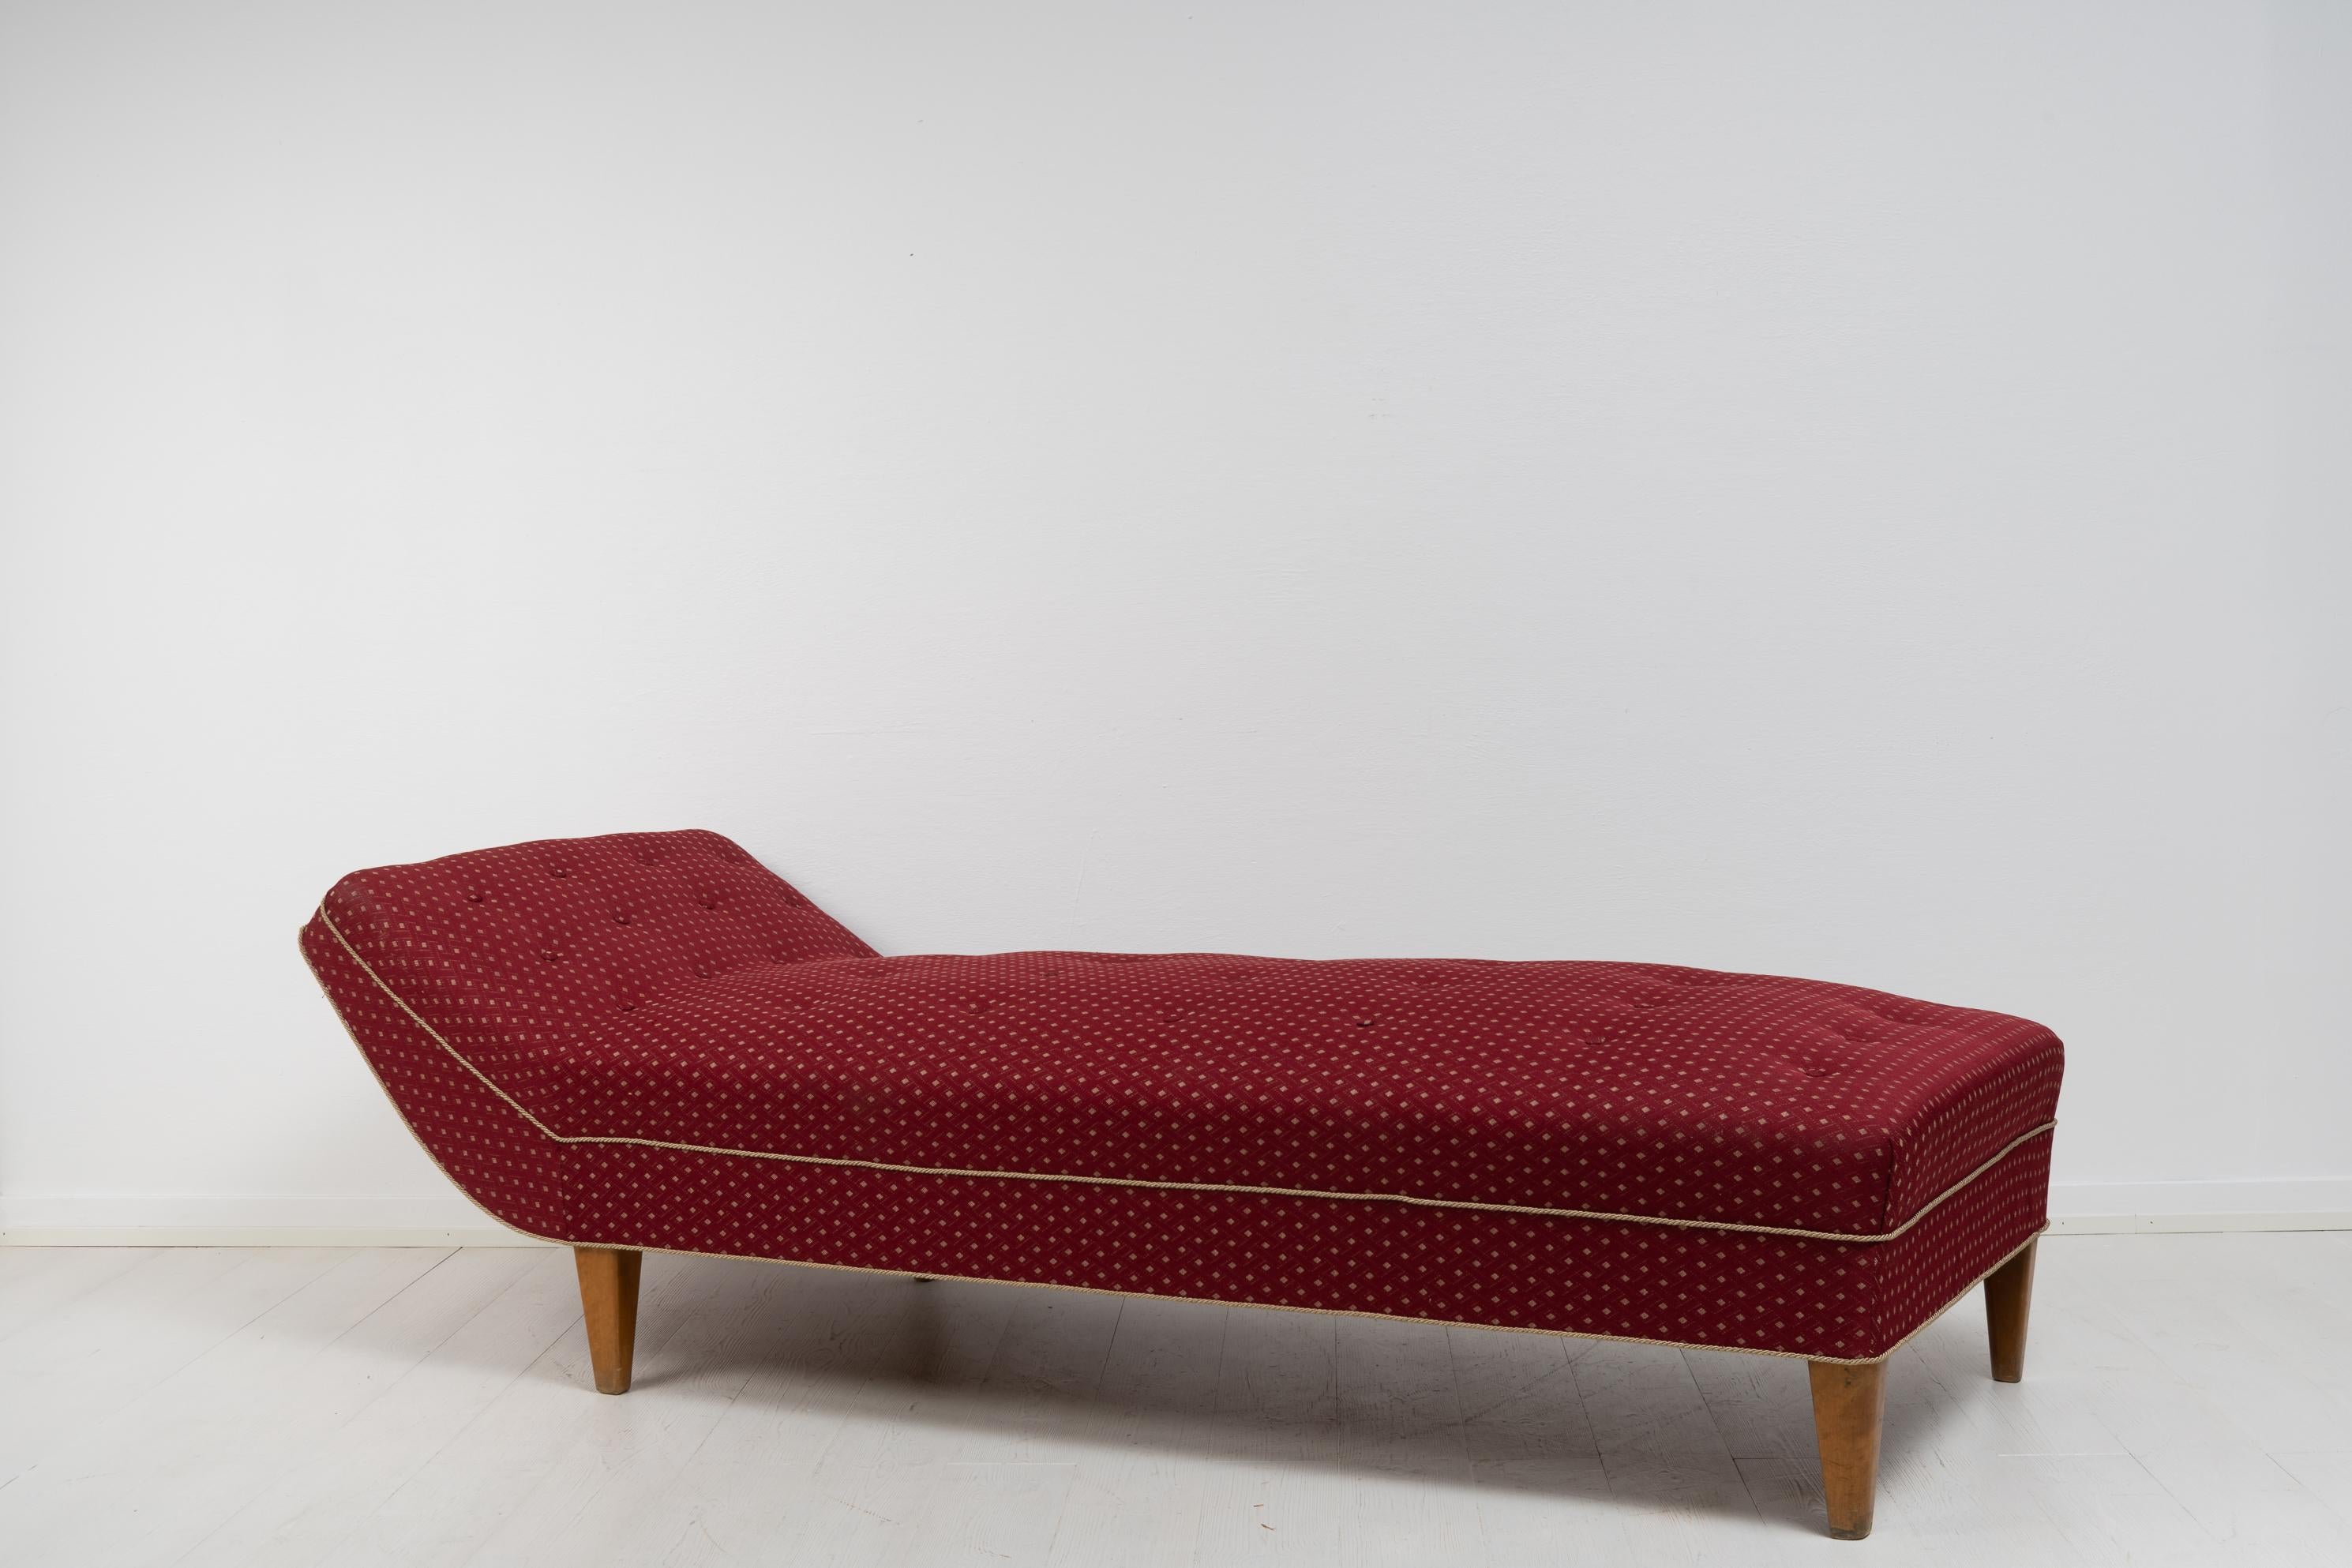 Scandinavian modern Swedish daybed from around the 1930s. The daybed has legs in birch and the original patterned upholstery. Good vintage condition consistent with age and use. The daybed dates back hundreds of years and is a versatile furniture